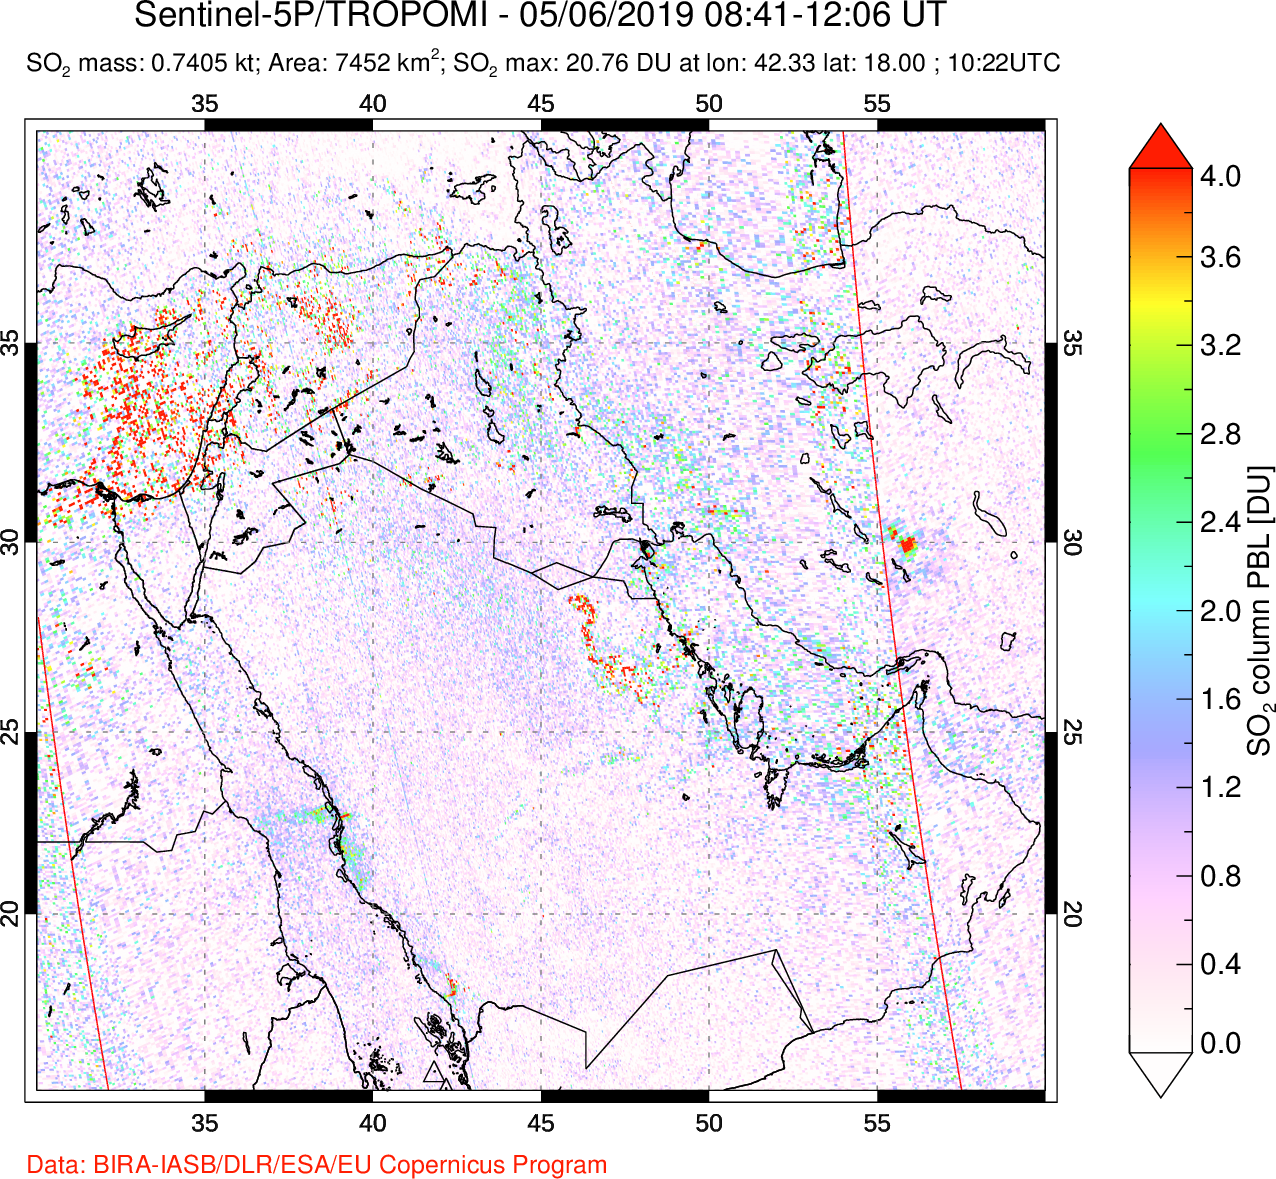 A sulfur dioxide image over Middle East on May 06, 2019.